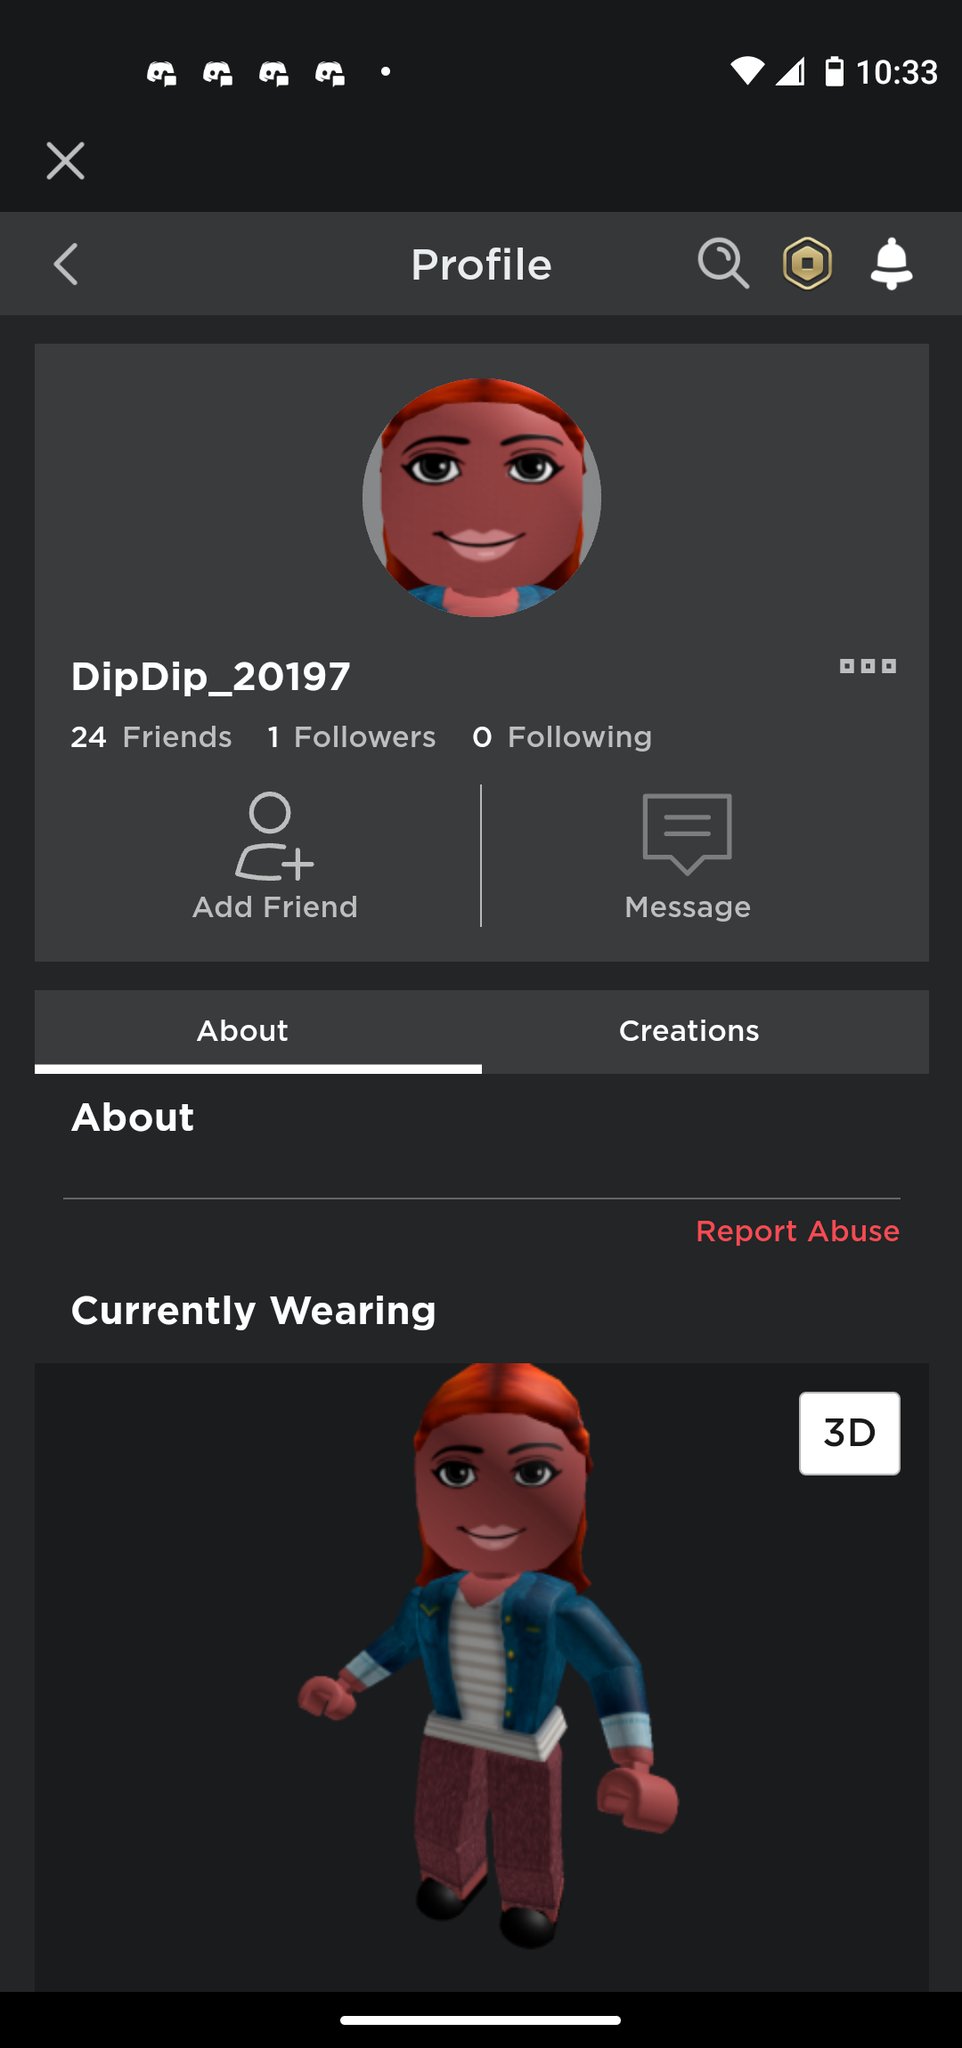 27jennife on X: Guys I Have a Problem There a Hacker of Roblox Players Name  DipDip_20197 Don't Add Her is a Hacker They Will Hack your Account Report  Her to Get Banned